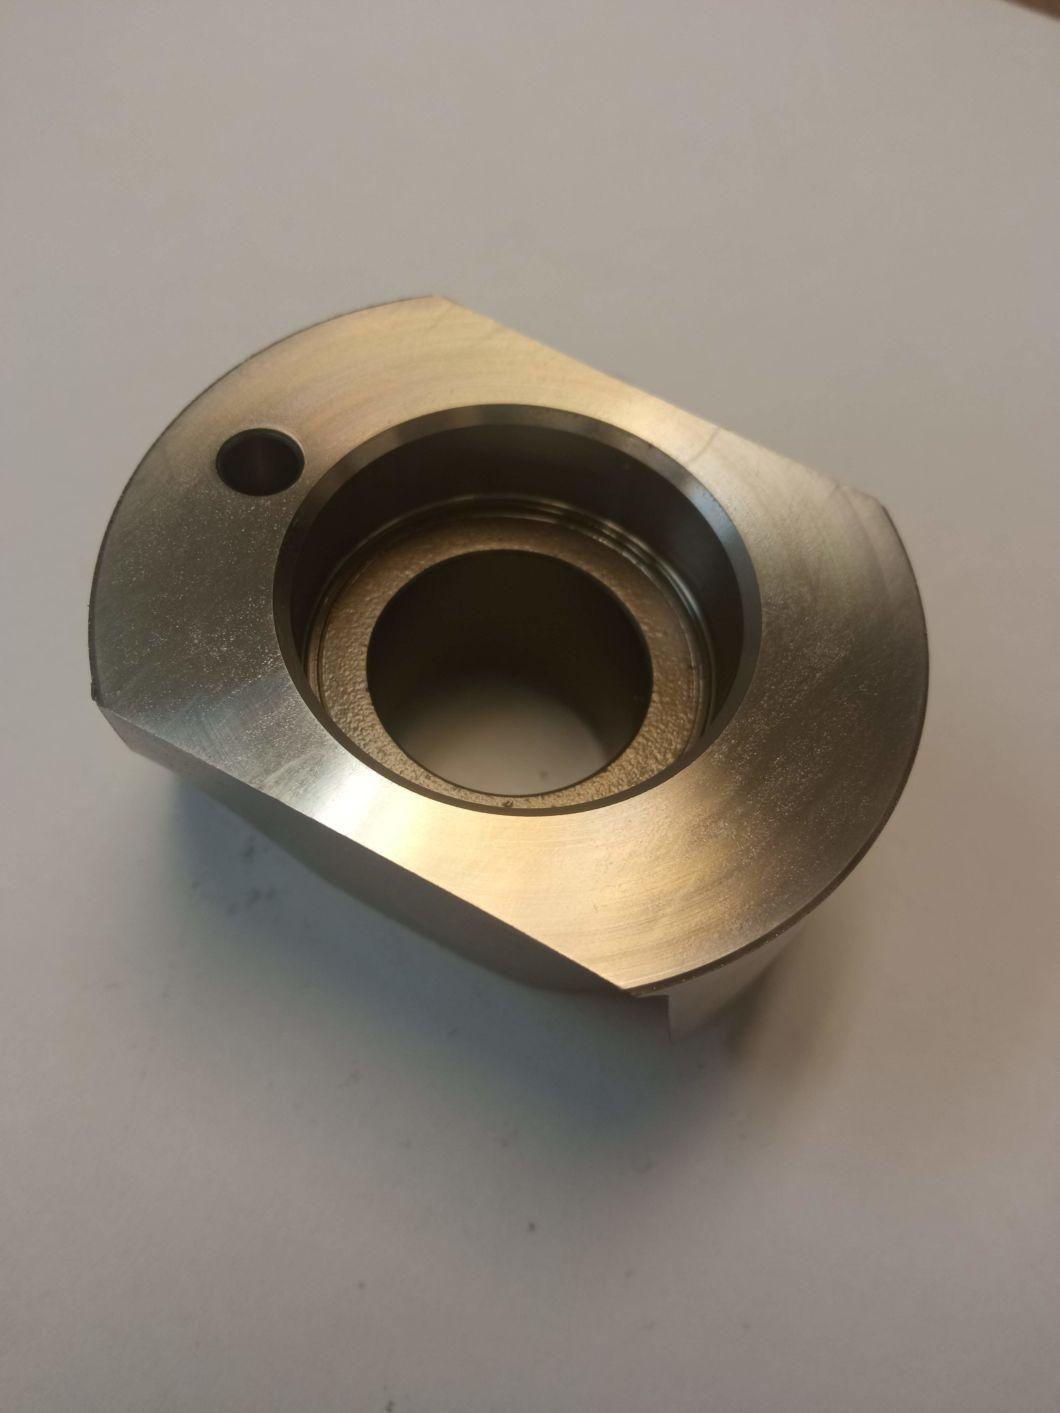 Investment Casting/Die Casting with Aluminum/Carbon Steel /Stainless Steel/Brass